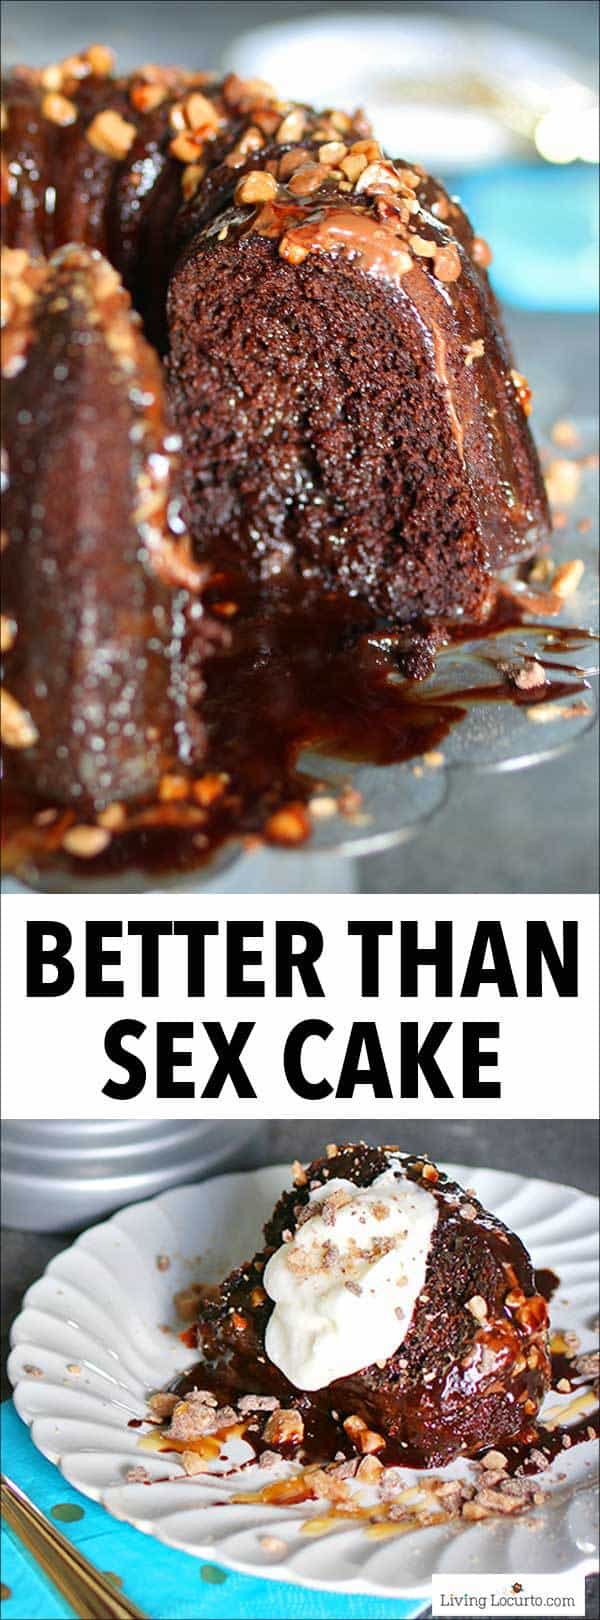 Better Than Sex Cake Recipe. Easy Chocolate Bundt cake filled with caramel and toffee makes a sinful dessert. 